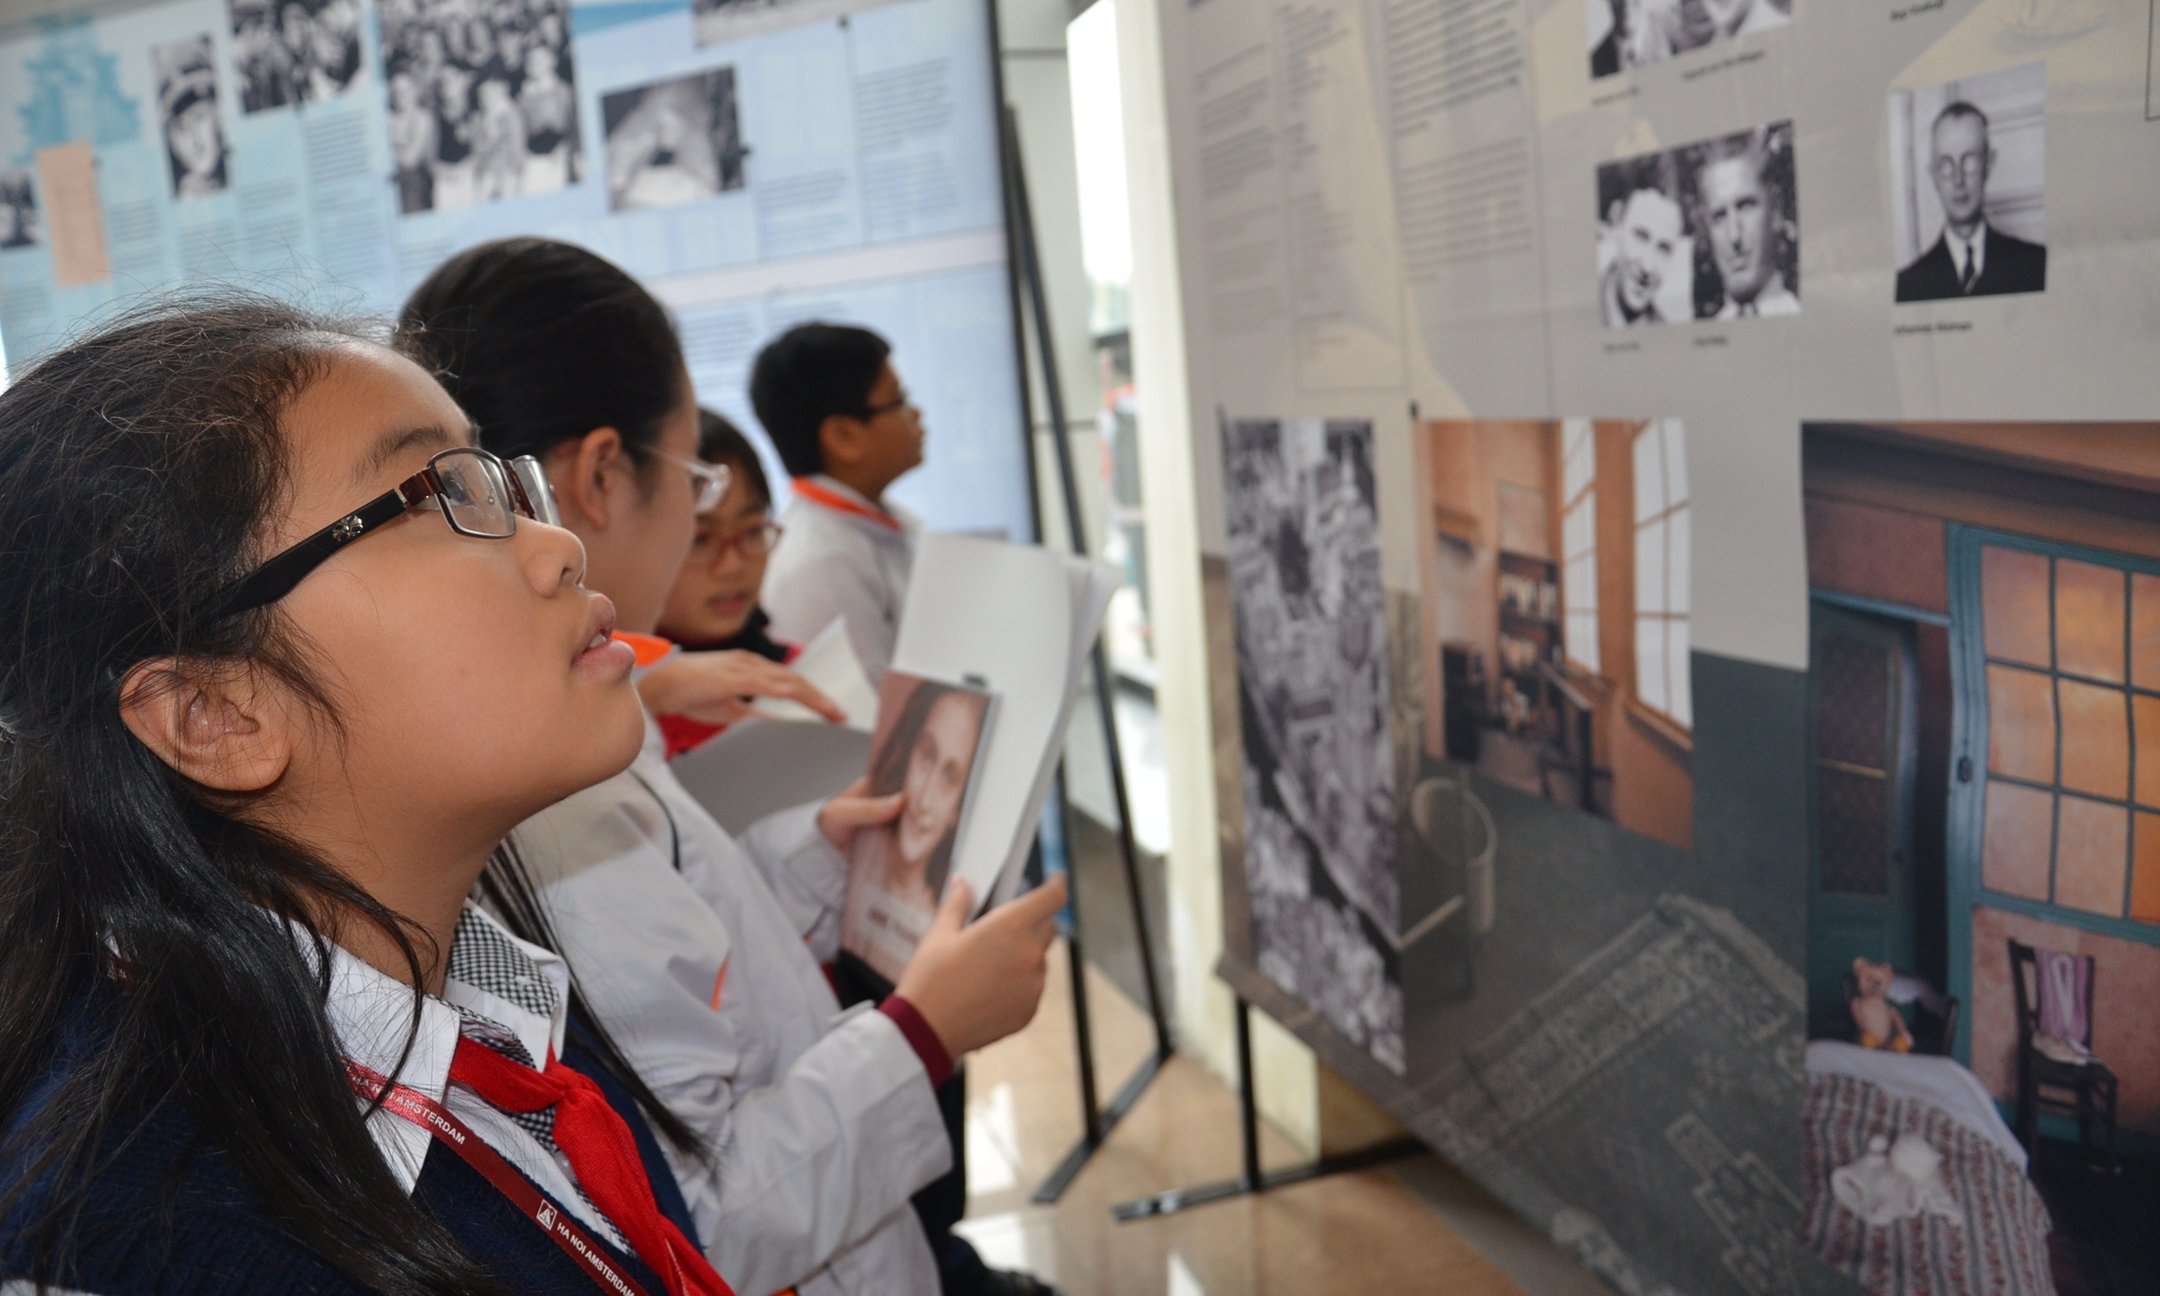 Exhibition 'Anne Frank a History for today' in Hanoi, Vietnam